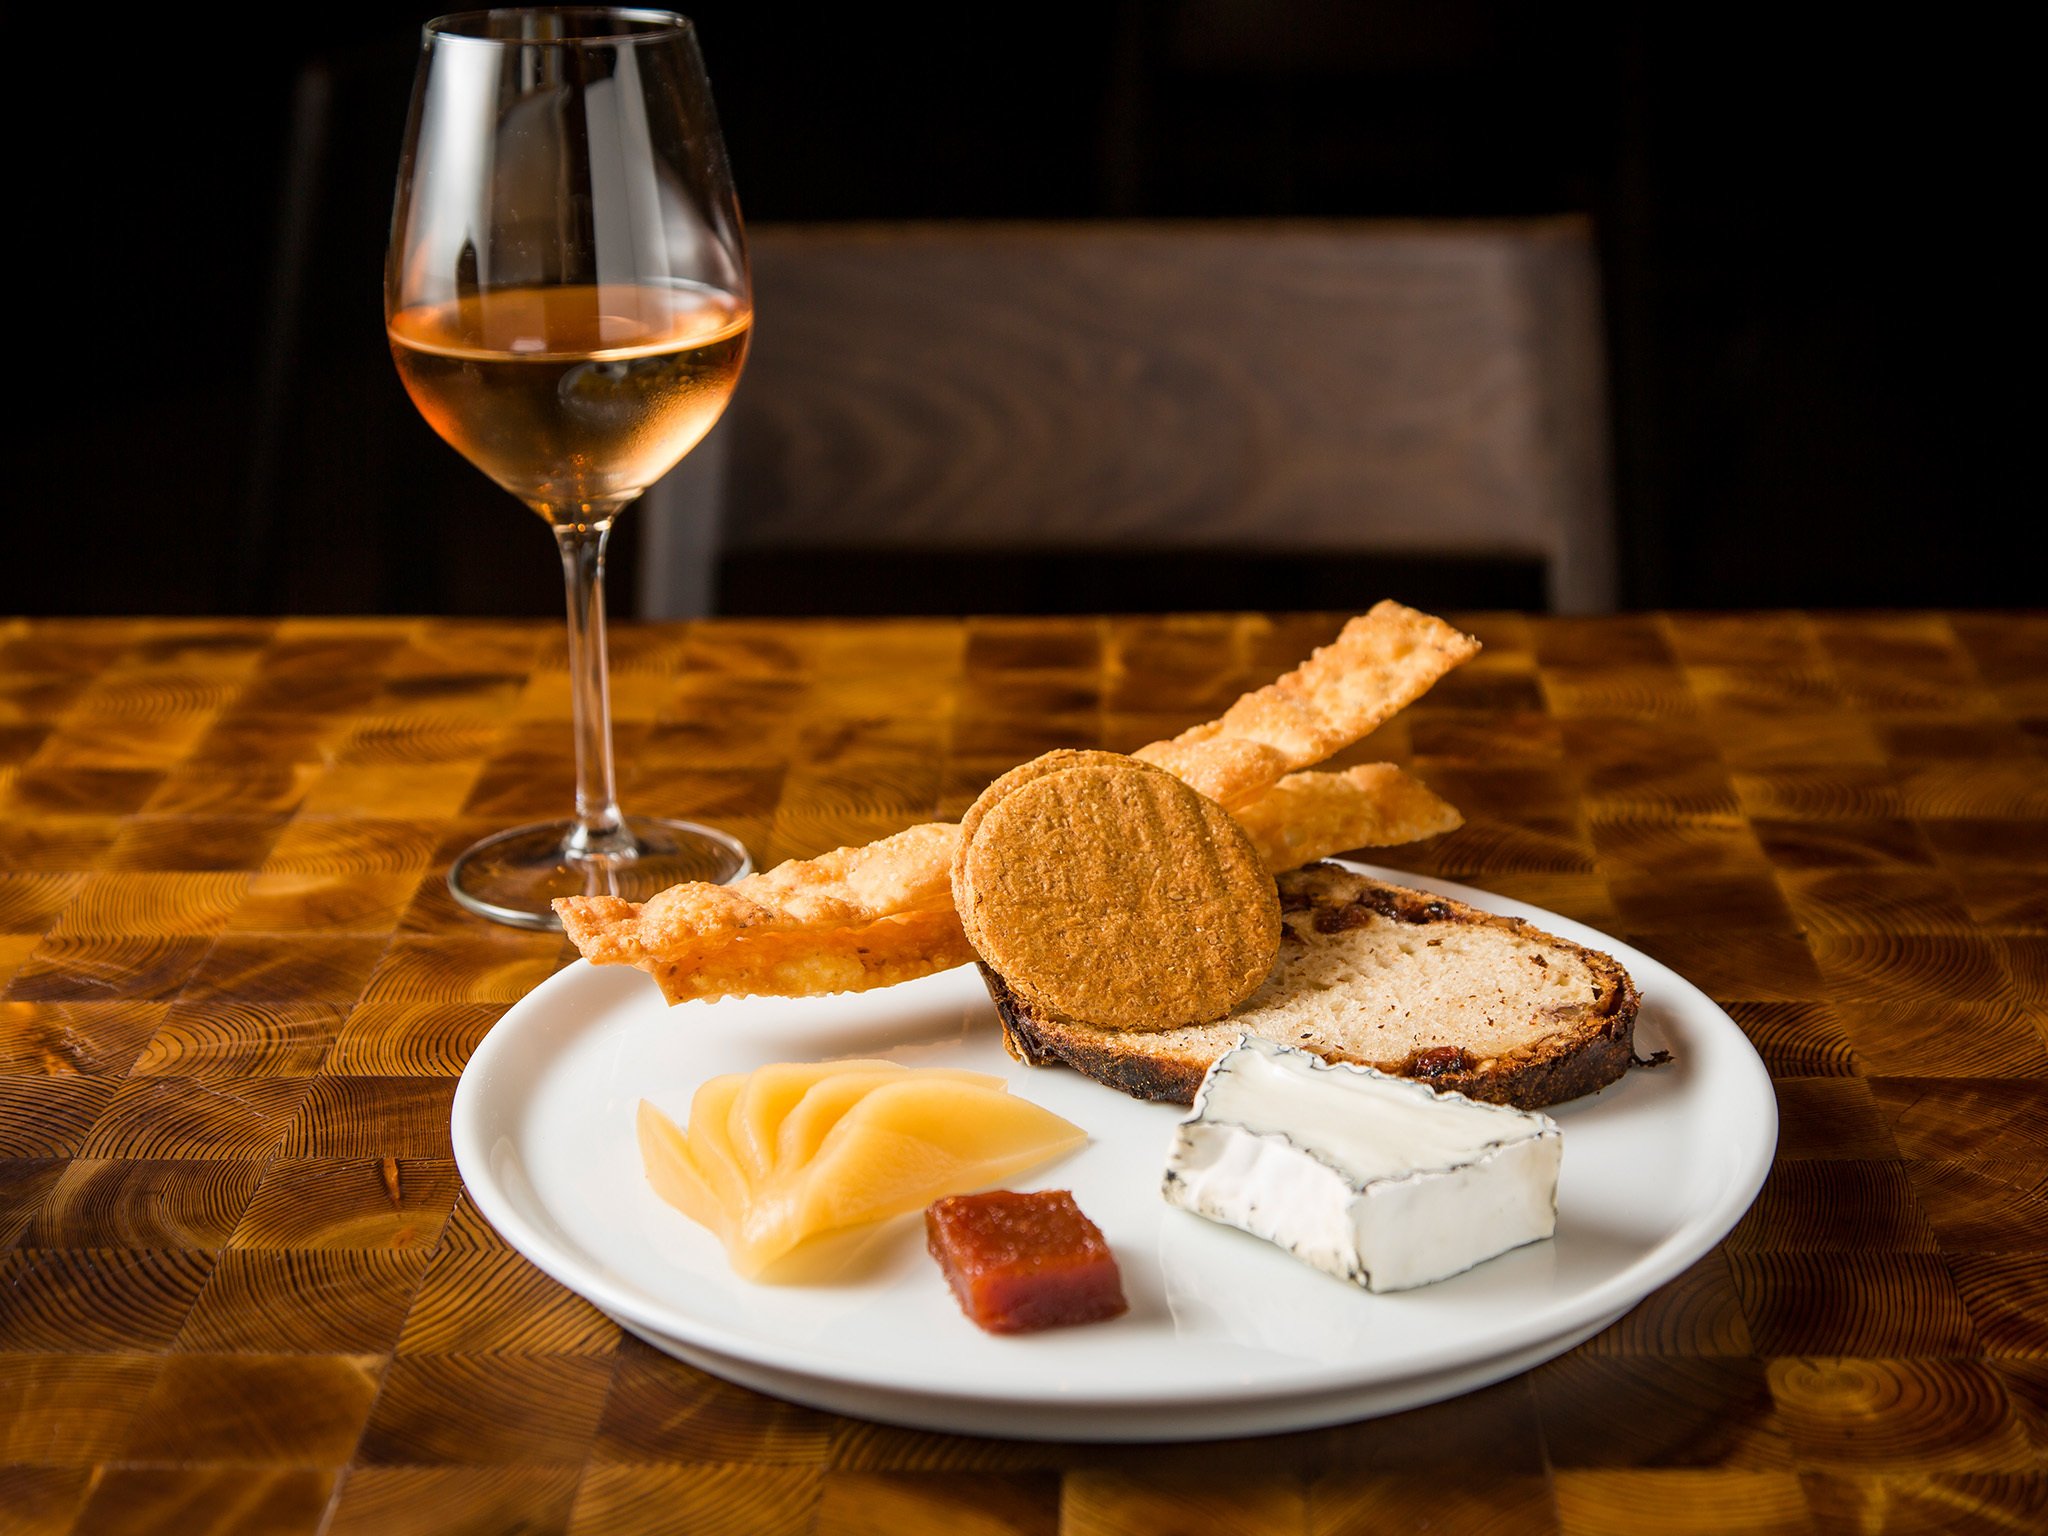 The 12 best places to eat cheese and wine in Sydney